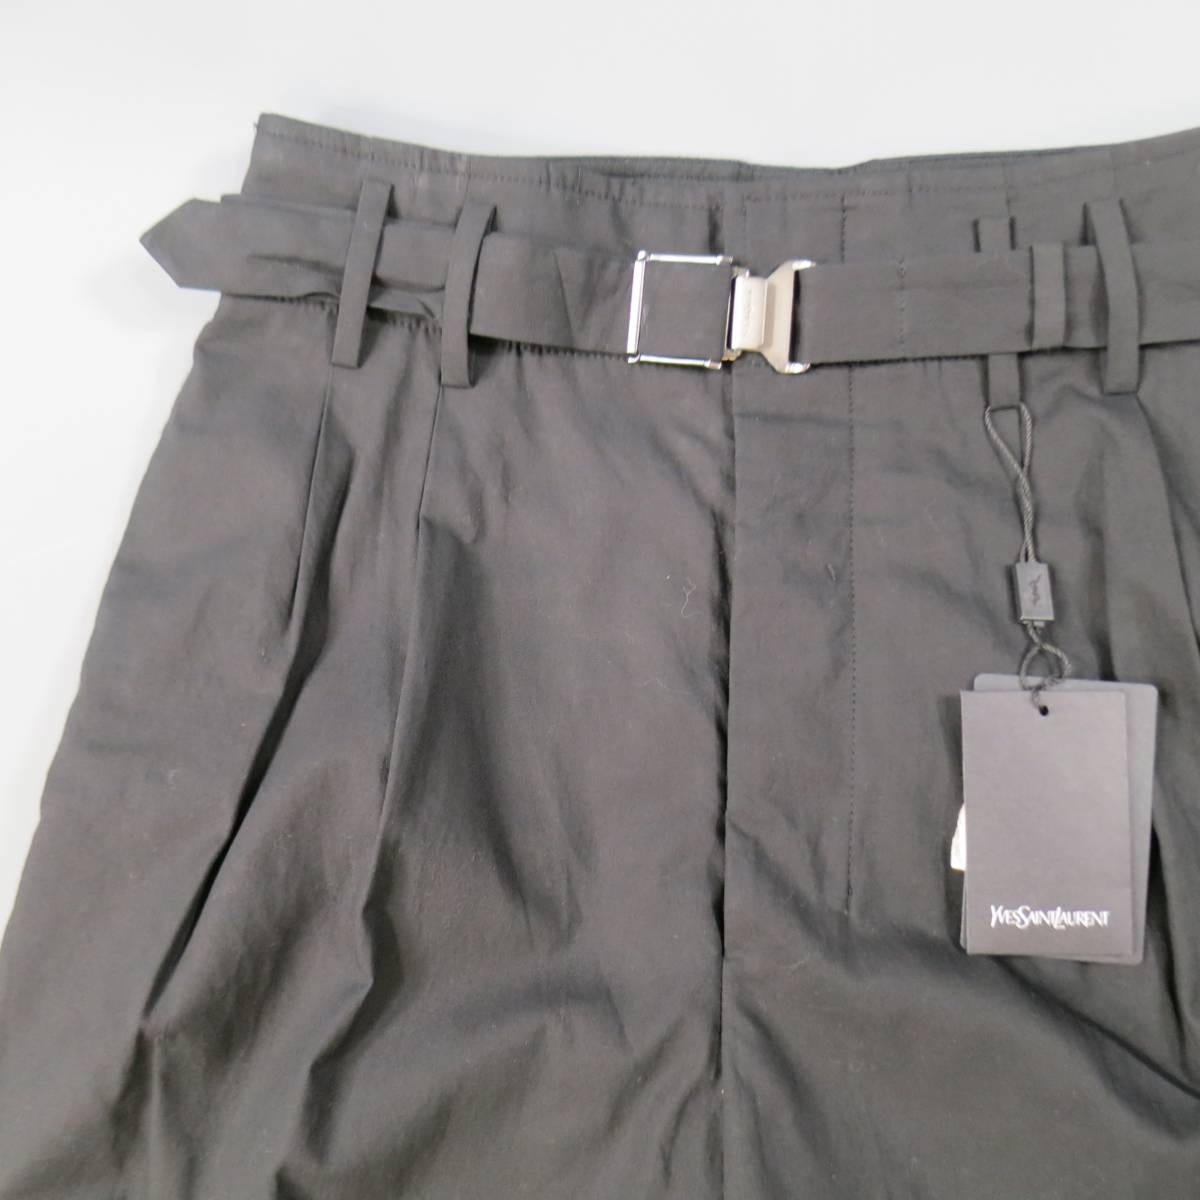 These rare YVES SAINT LAURENT dress pants come in a light weight cotton and feature a high rise, oval shaped taper leg, pleated flat font, and matching fabric belt with silver tone embossed closure. Unhemmed. Made in Italy.
 
Brand New with